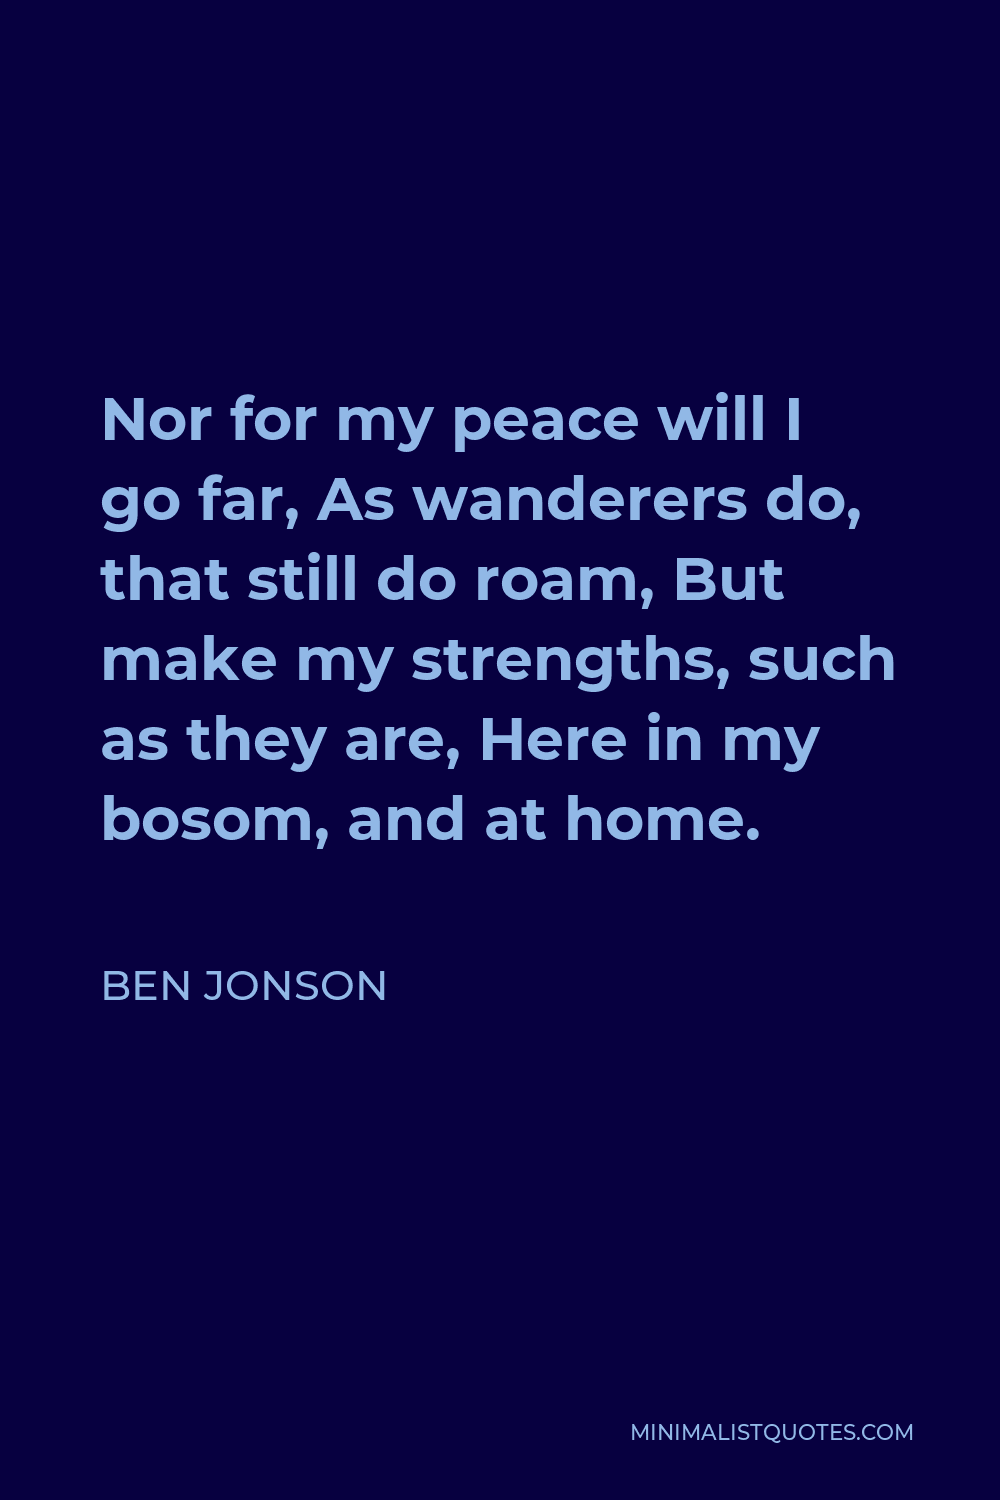 Ben Jonson Quote - Nor for my peace will I go far, As wanderers do, that still do roam, But make my strengths, such as they are, Here in my bosom, and at home.